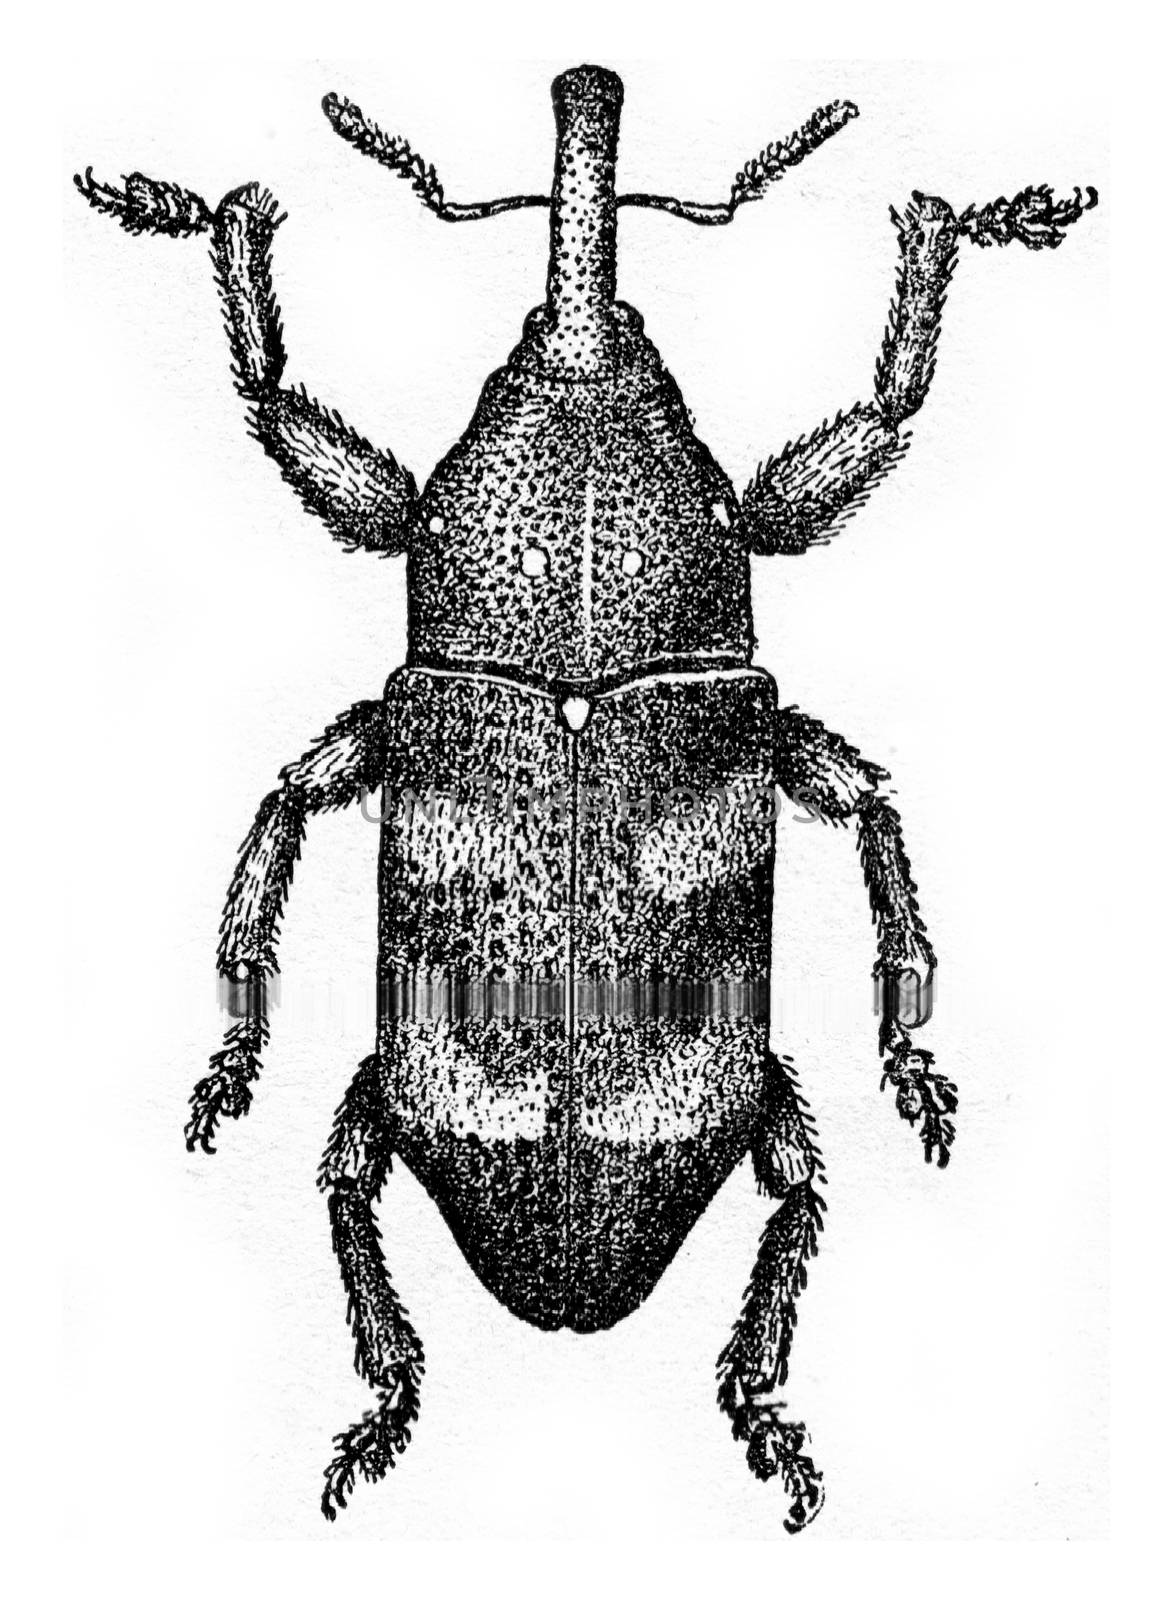 Pissodes harcyniae, vintage engraving. by Morphart